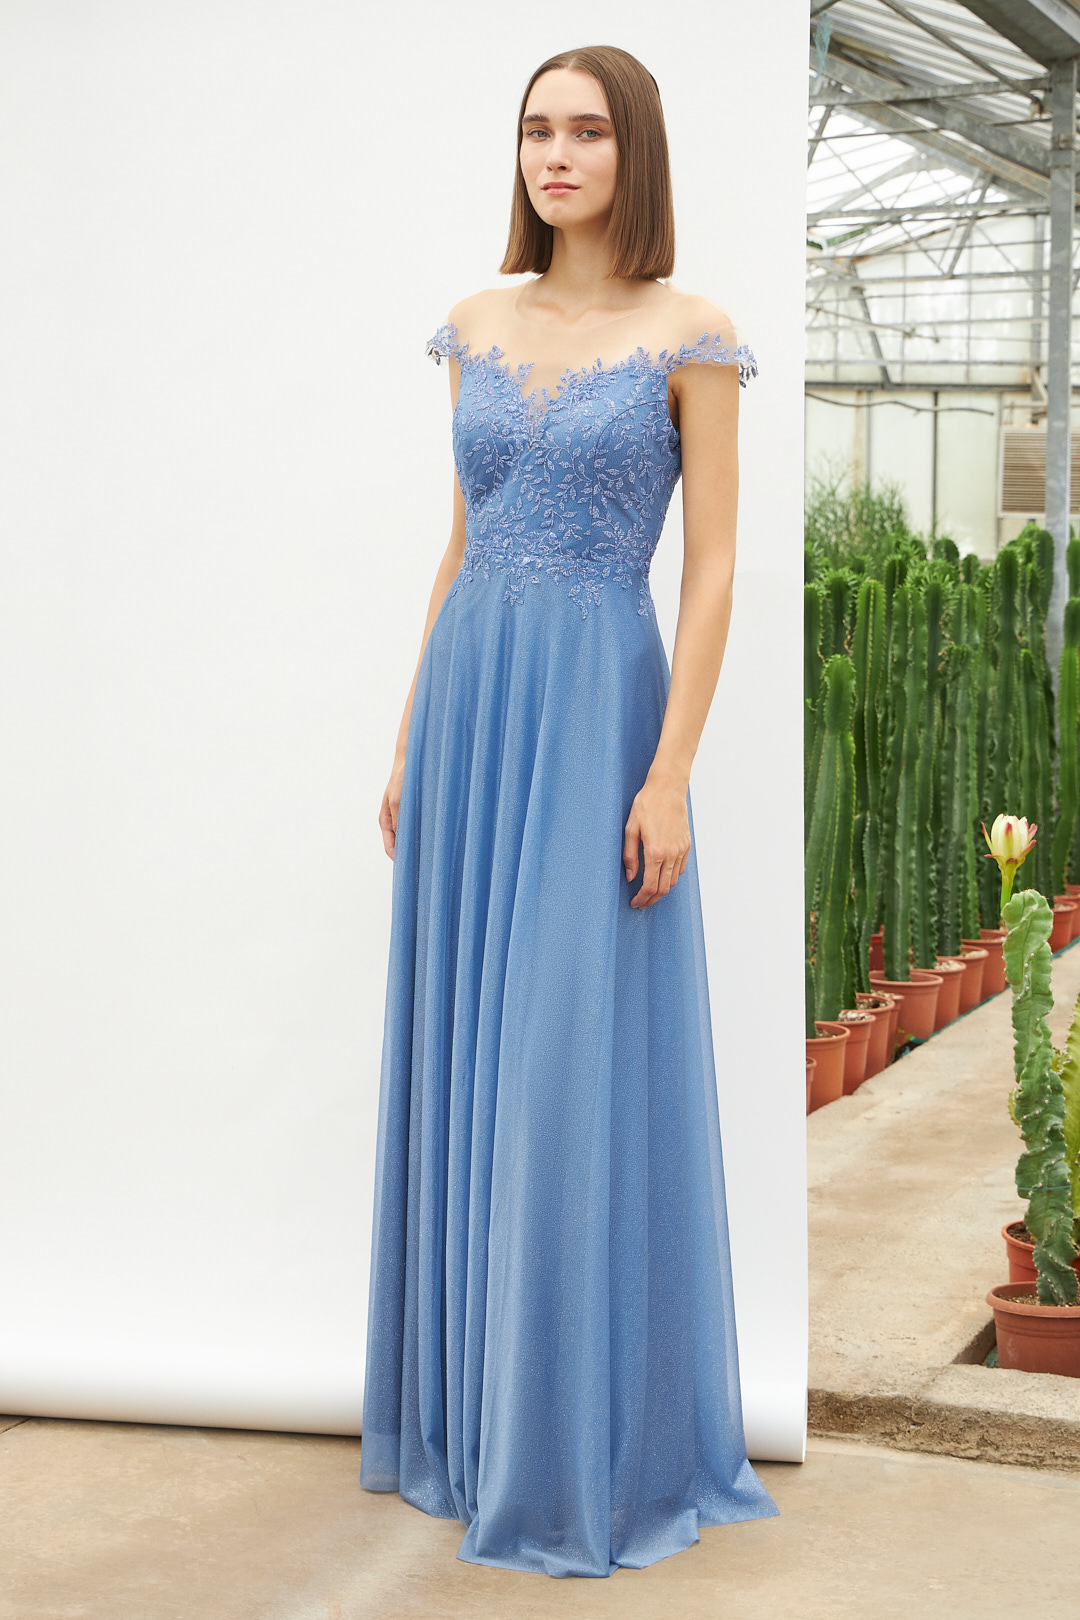 Classic Dresses / Long classic dress with shining fabric and beaded top